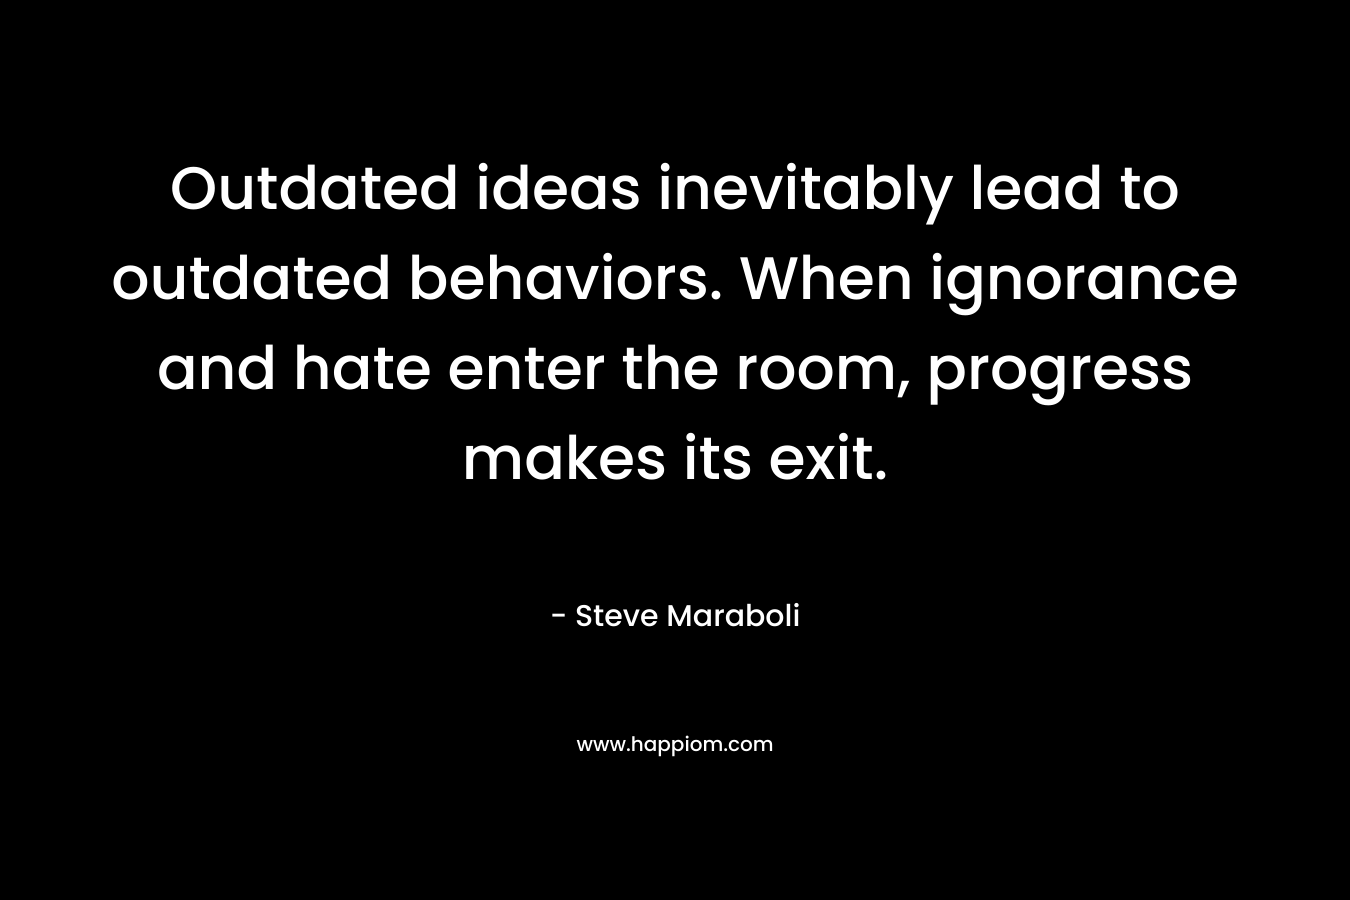 Outdated ideas inevitably lead to outdated behaviors. When ignorance and hate enter the room, progress makes its exit. – Steve Maraboli